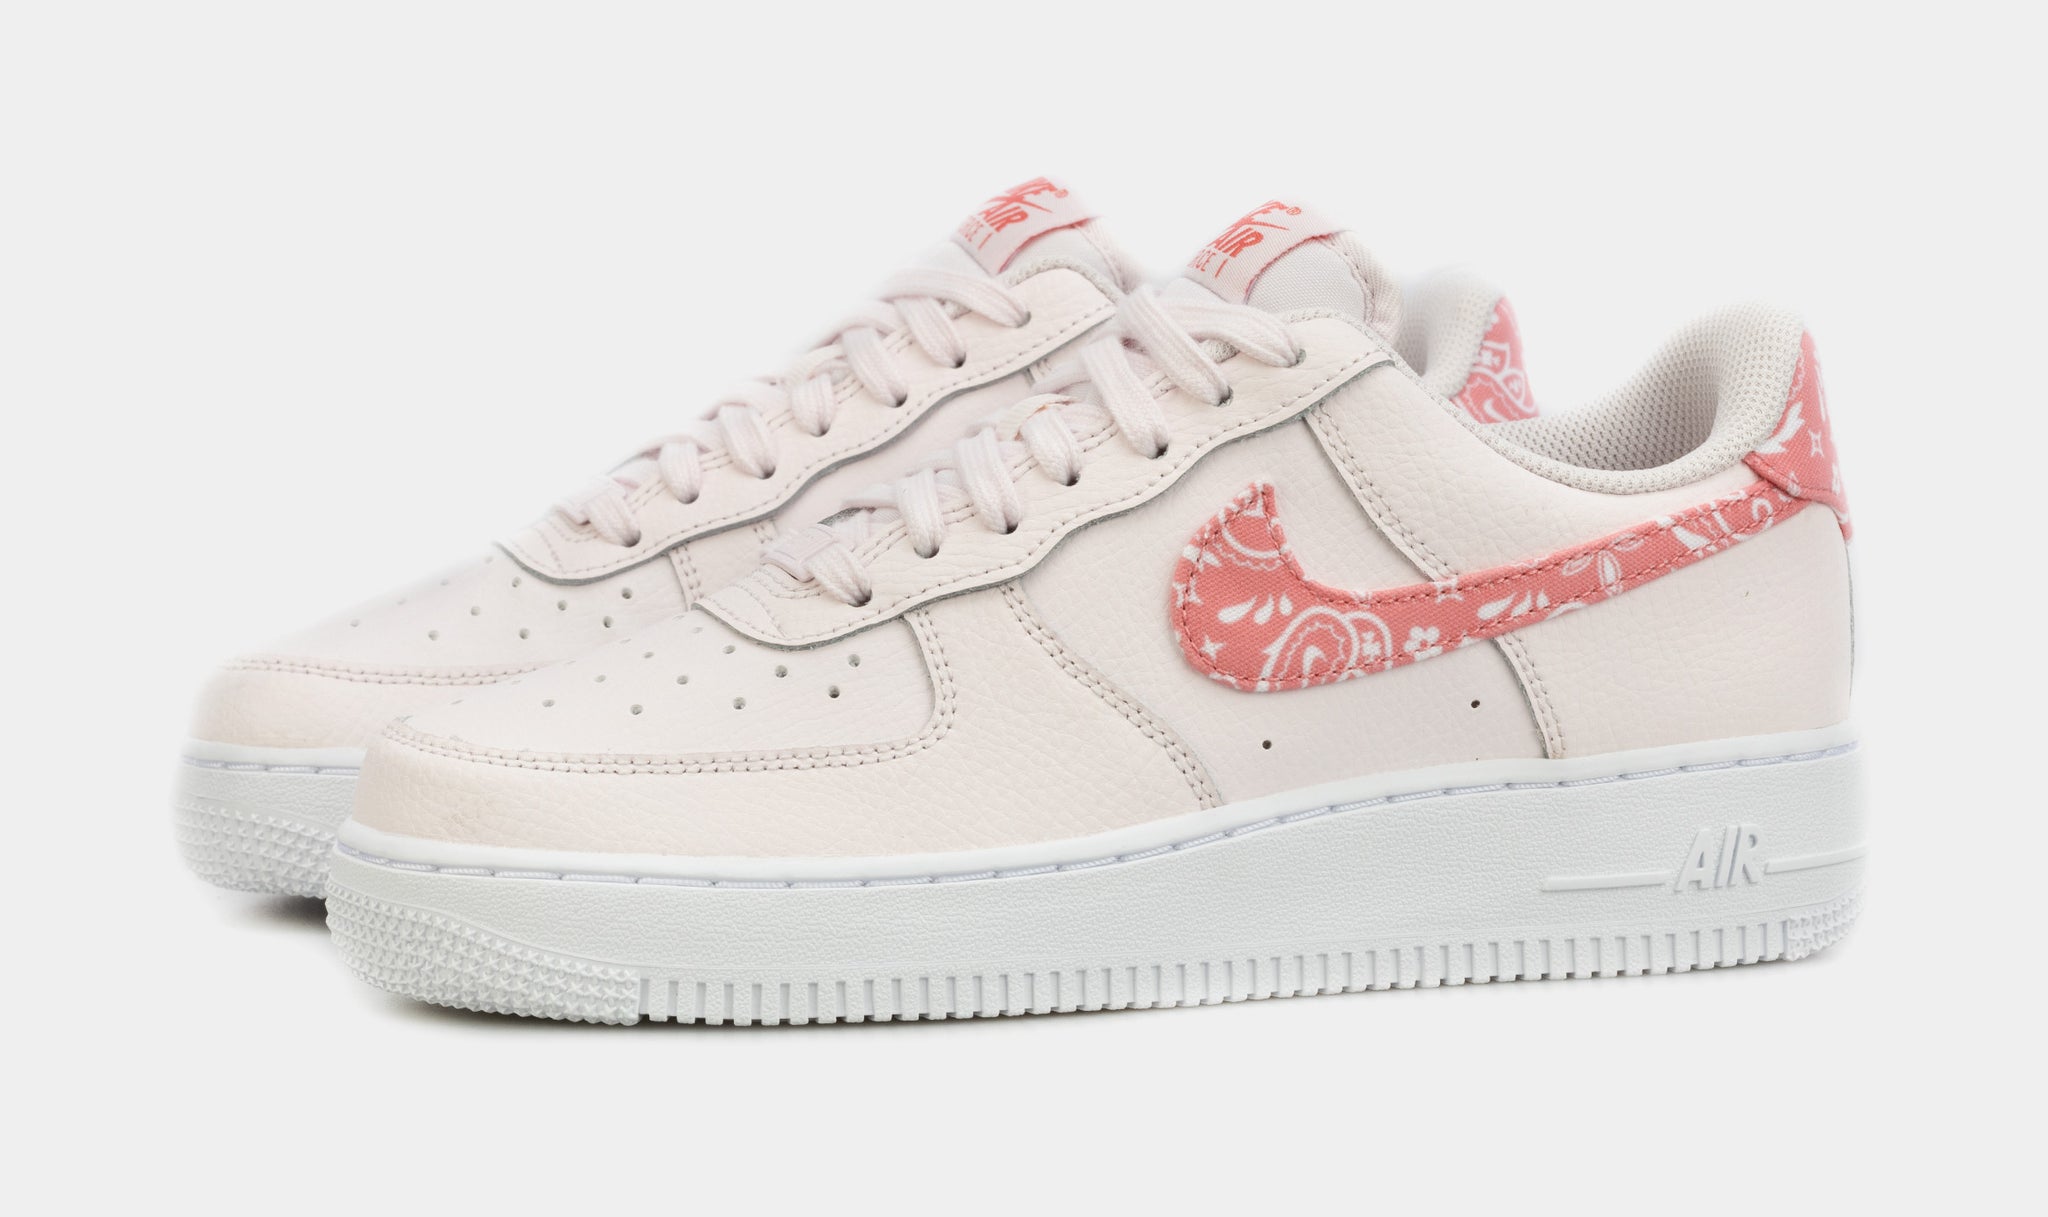 Air Force 1 '07 Pink Paisley Womens Lifestyle Shoes (Pink)